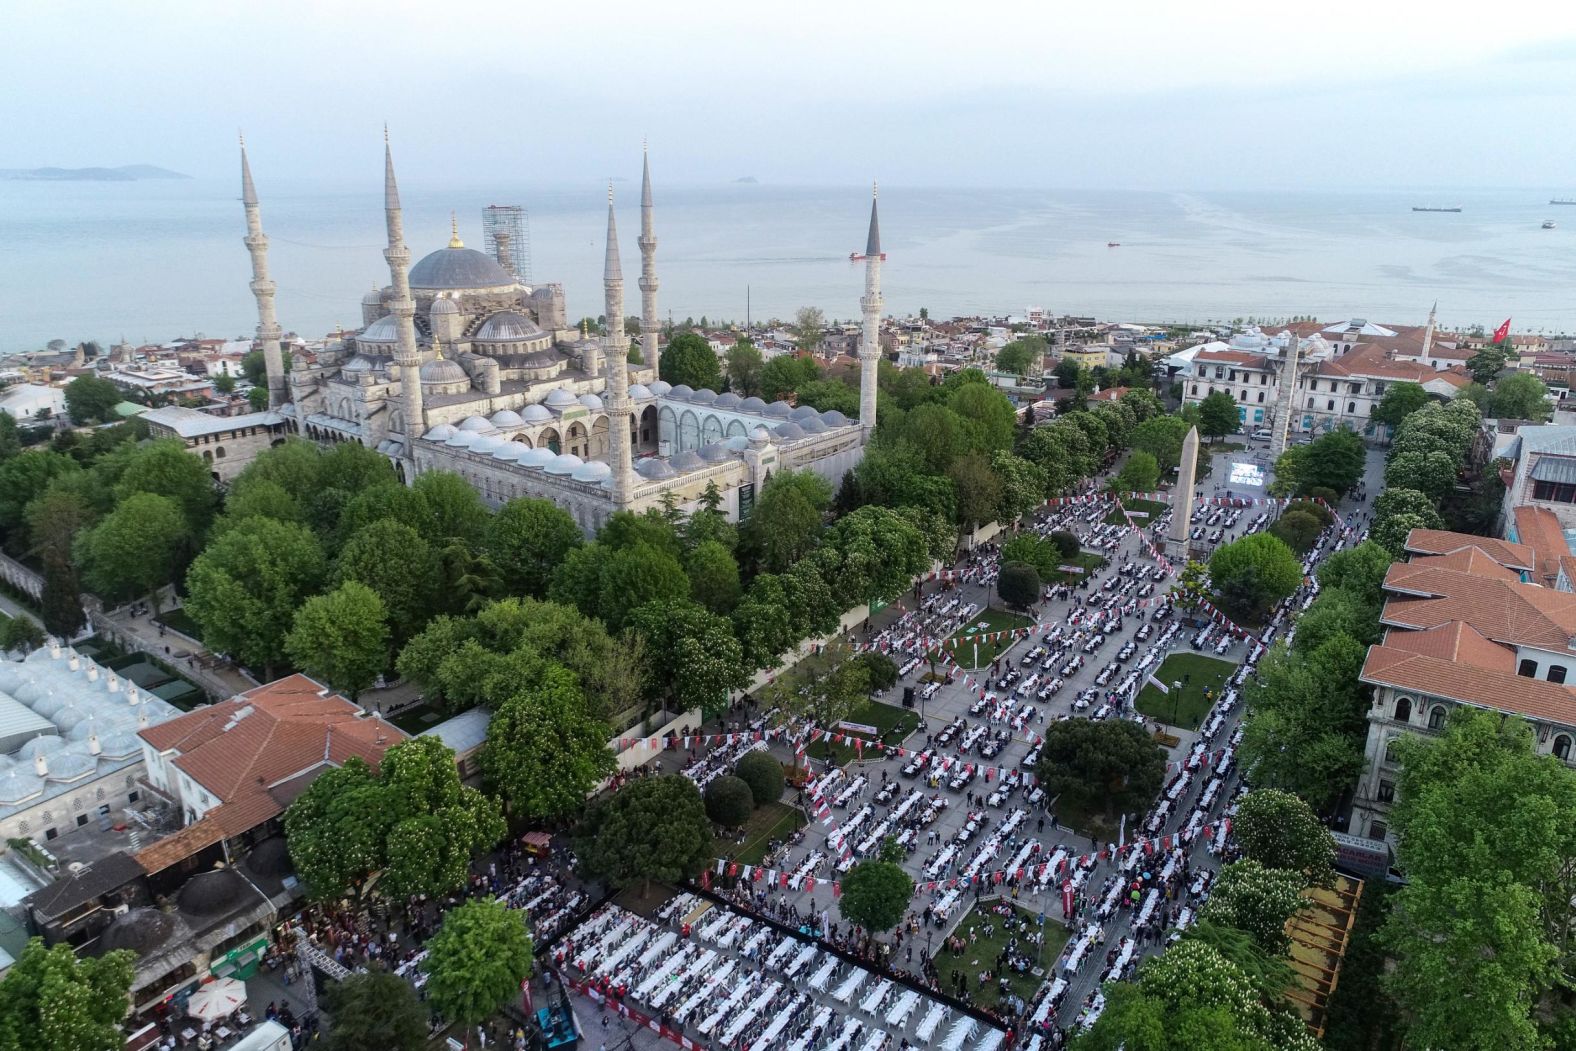 A drone photo shows thousands of people gather for iftar (fast-breaking) dinner during the Holy fasting month of Ramadan at Sultanahmet Square in Istanbul, Turkey on Monday, May 6.